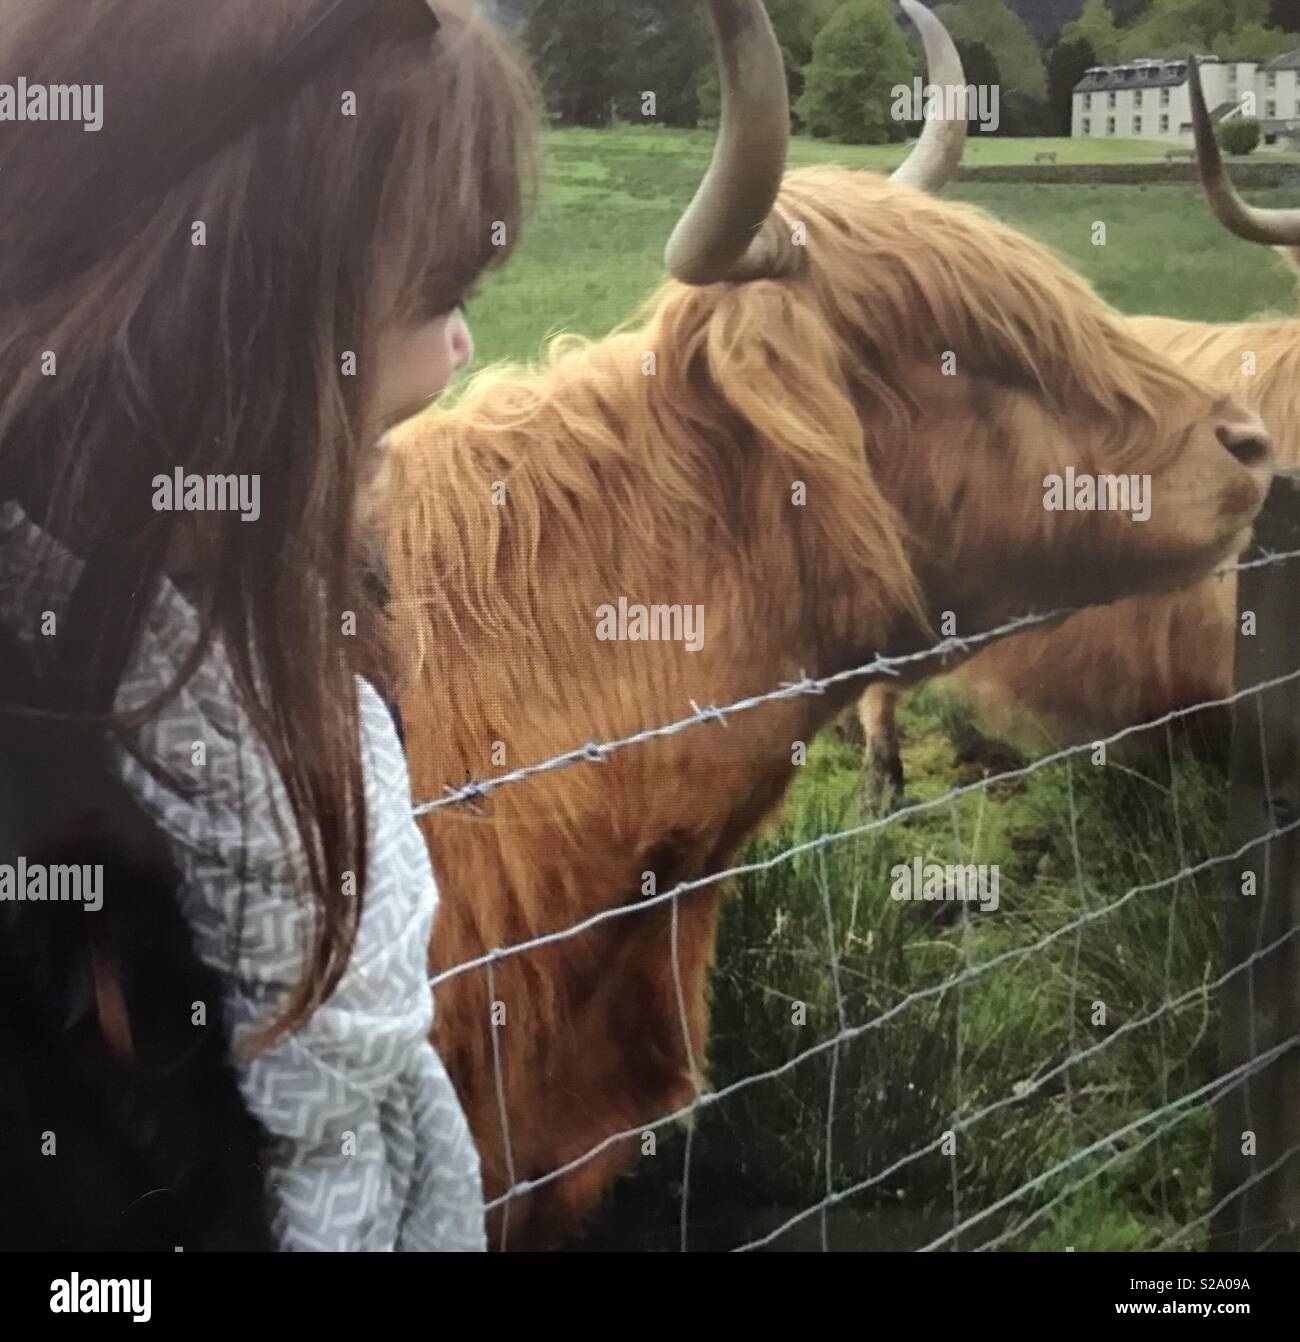 Admiring the hair color and bangs of a Scottish Hairy Coo! Stock Photo